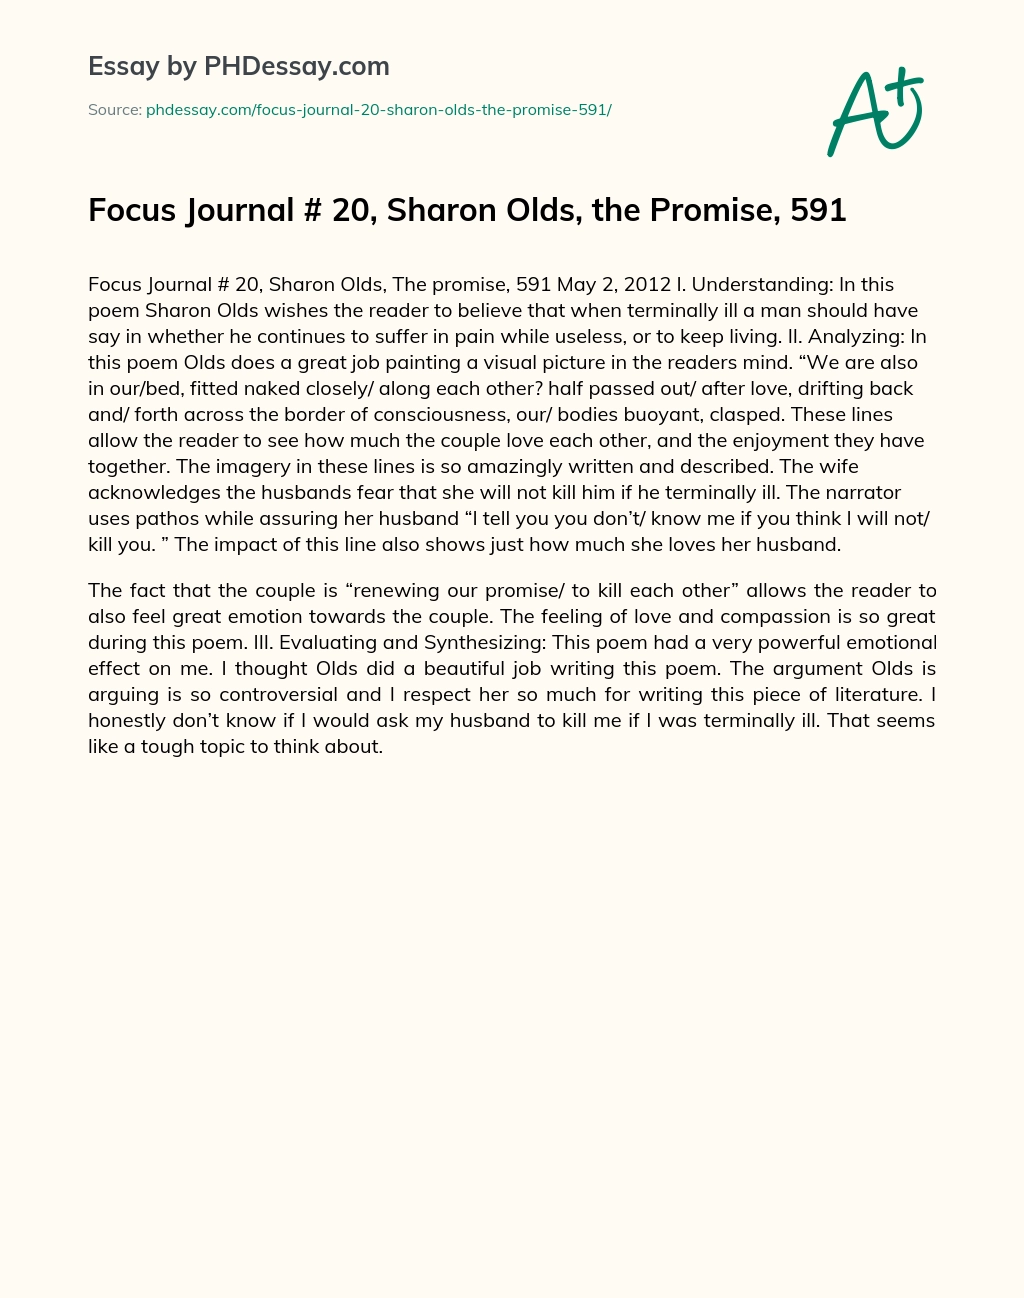 Focus Journal # 20, Sharon Olds, the Promise, 591 essay